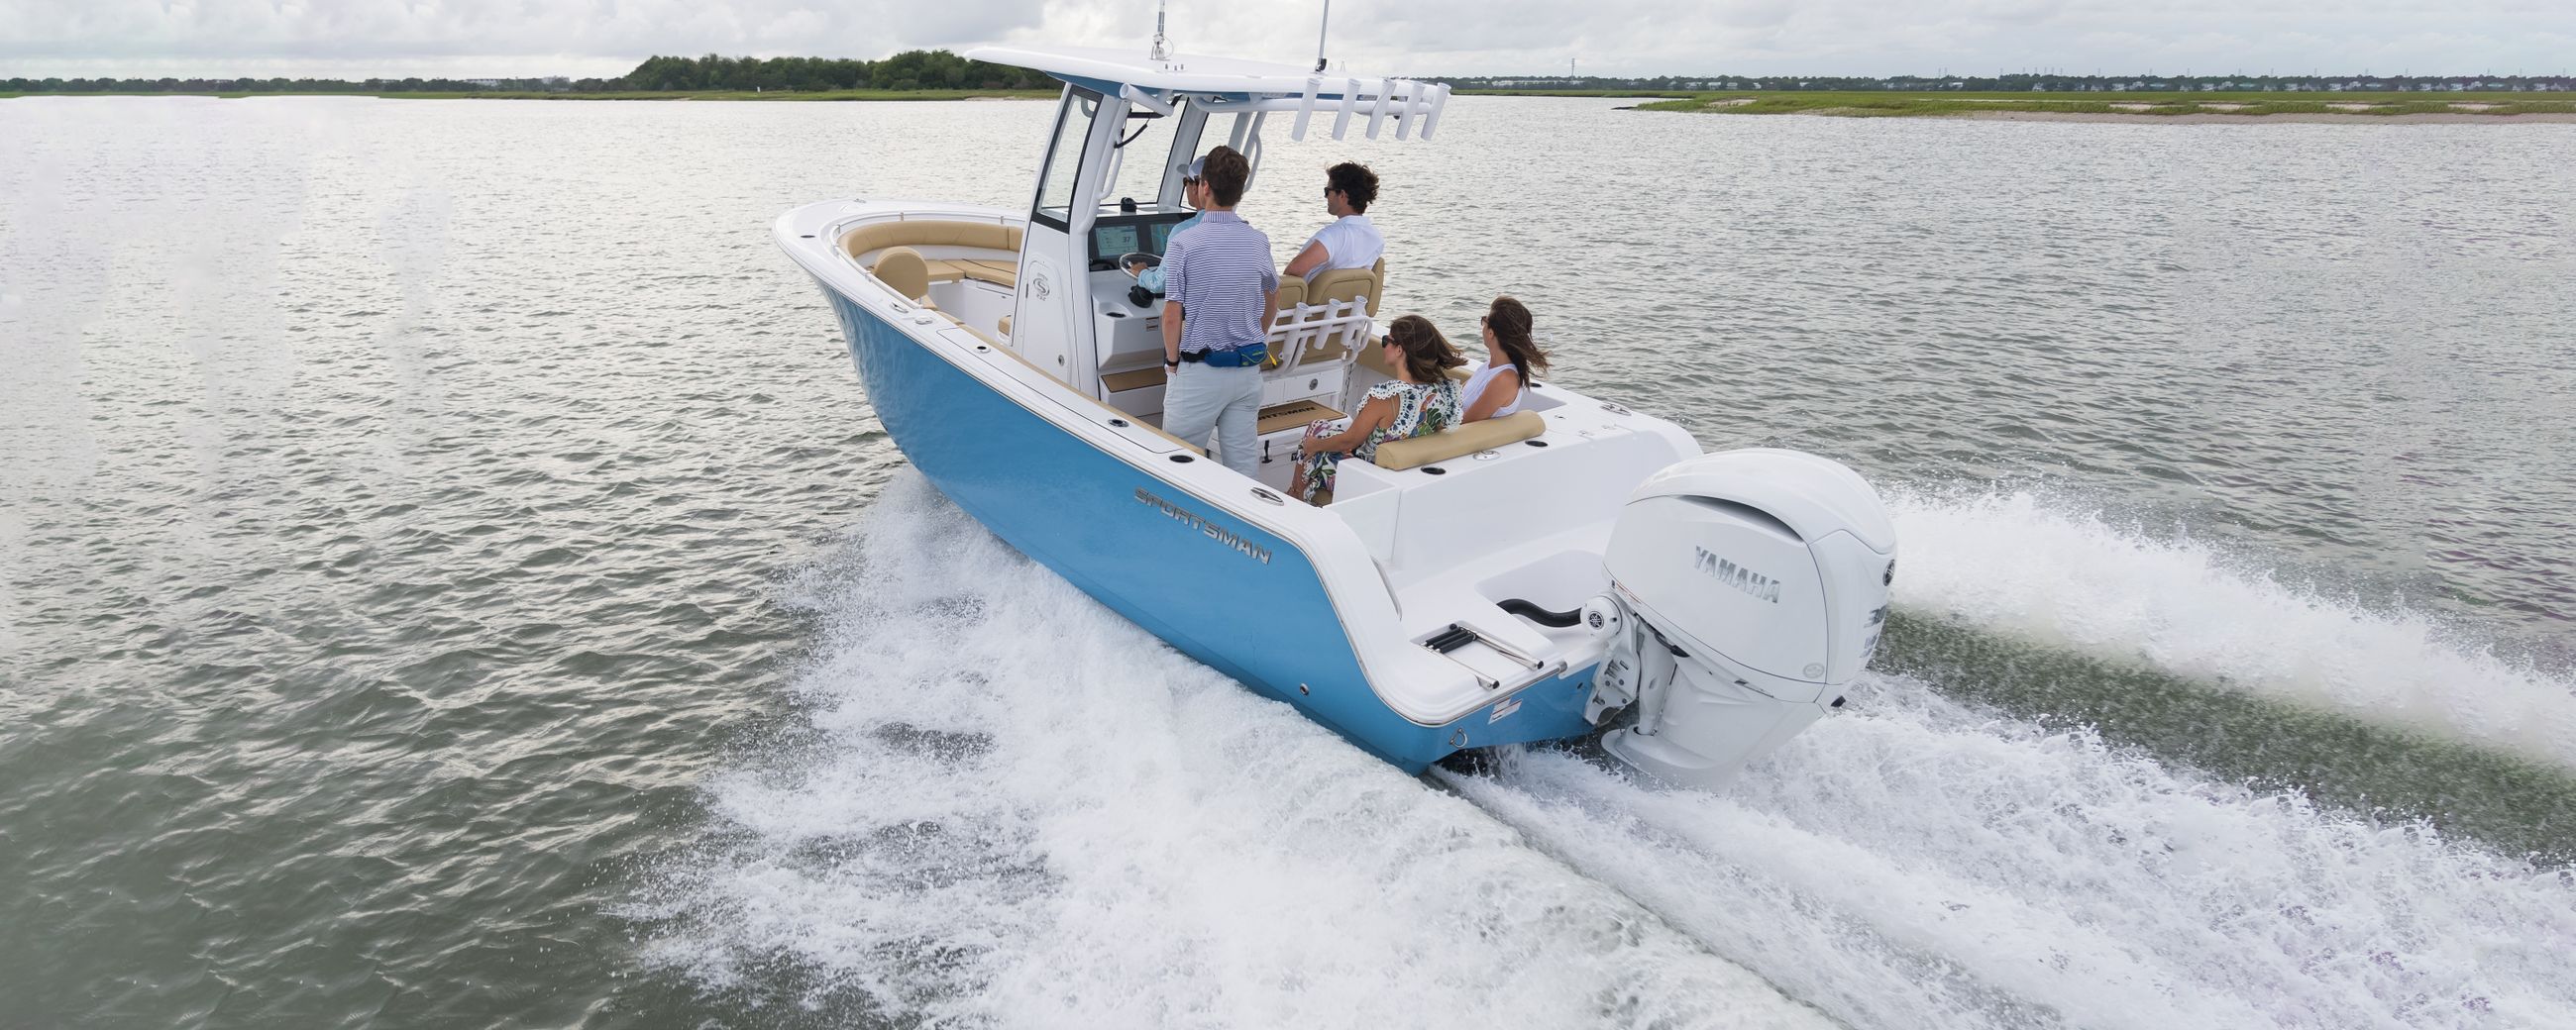 The Open 232 running on the water with the showing off the Seakeeper system.